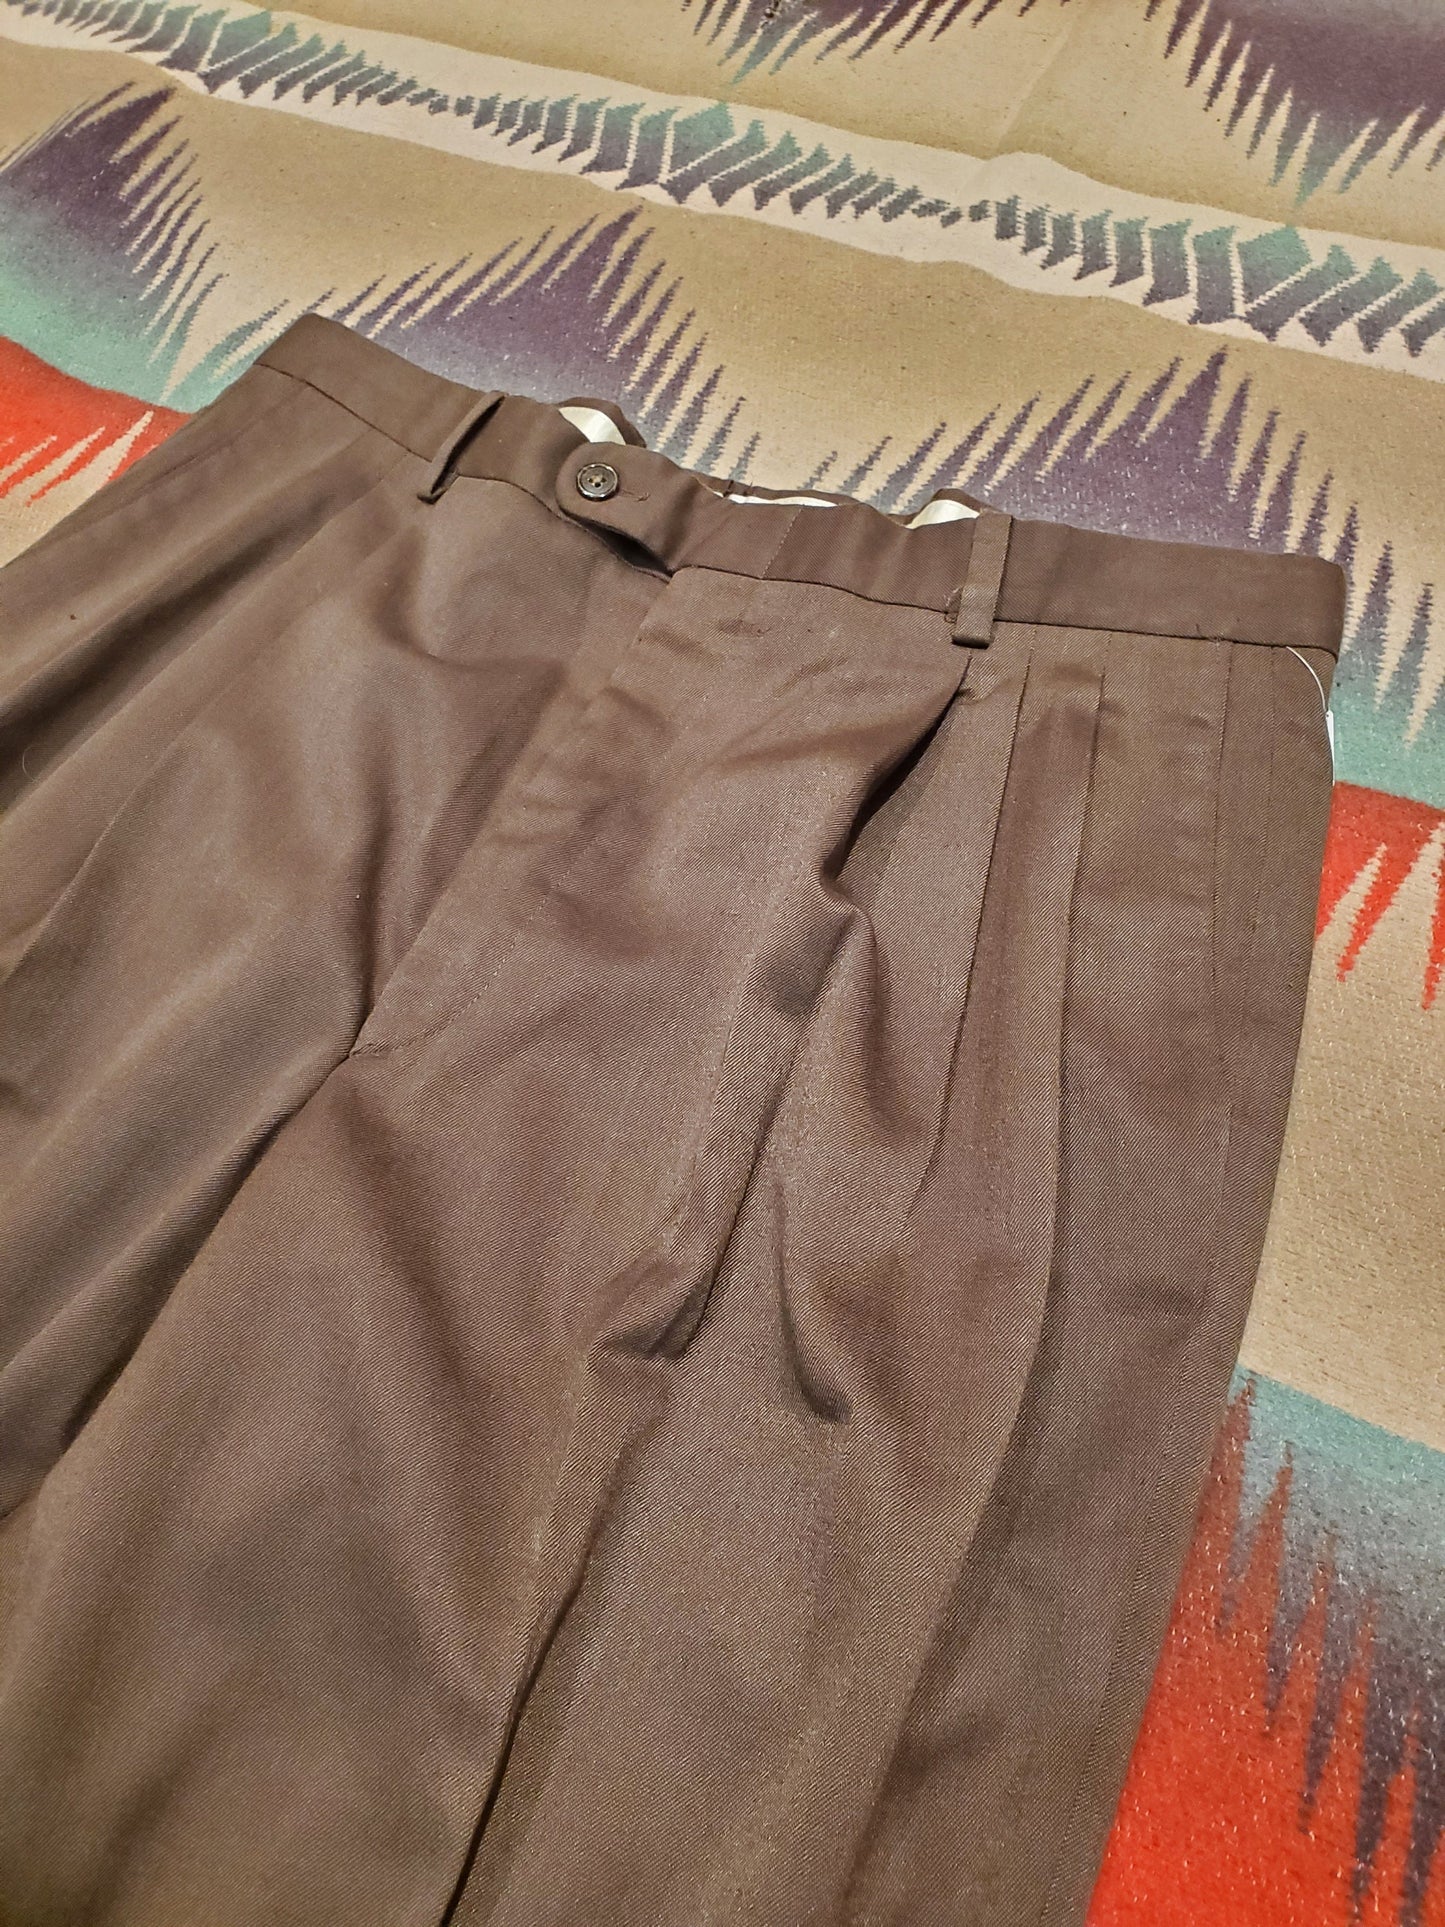 1980s/1990s Ivy Crew Brown Trousers Size 35x33